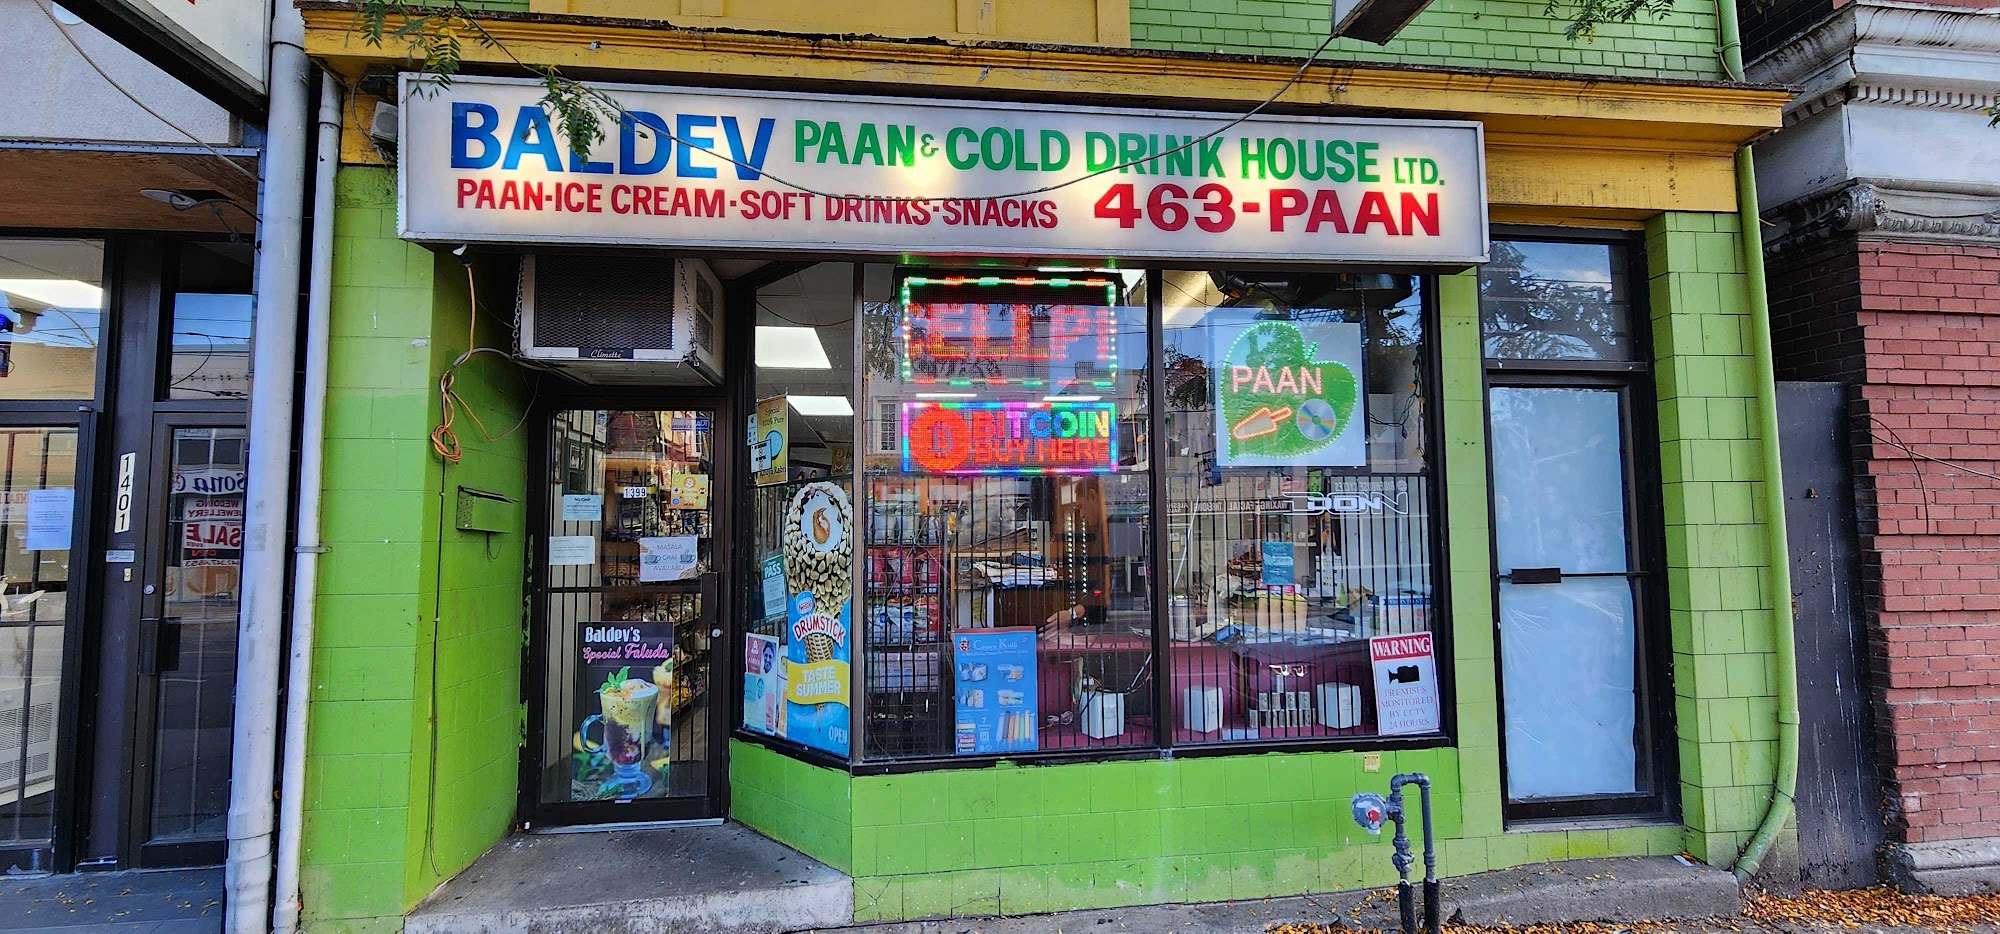 Baldev Paan and Cold Drink House